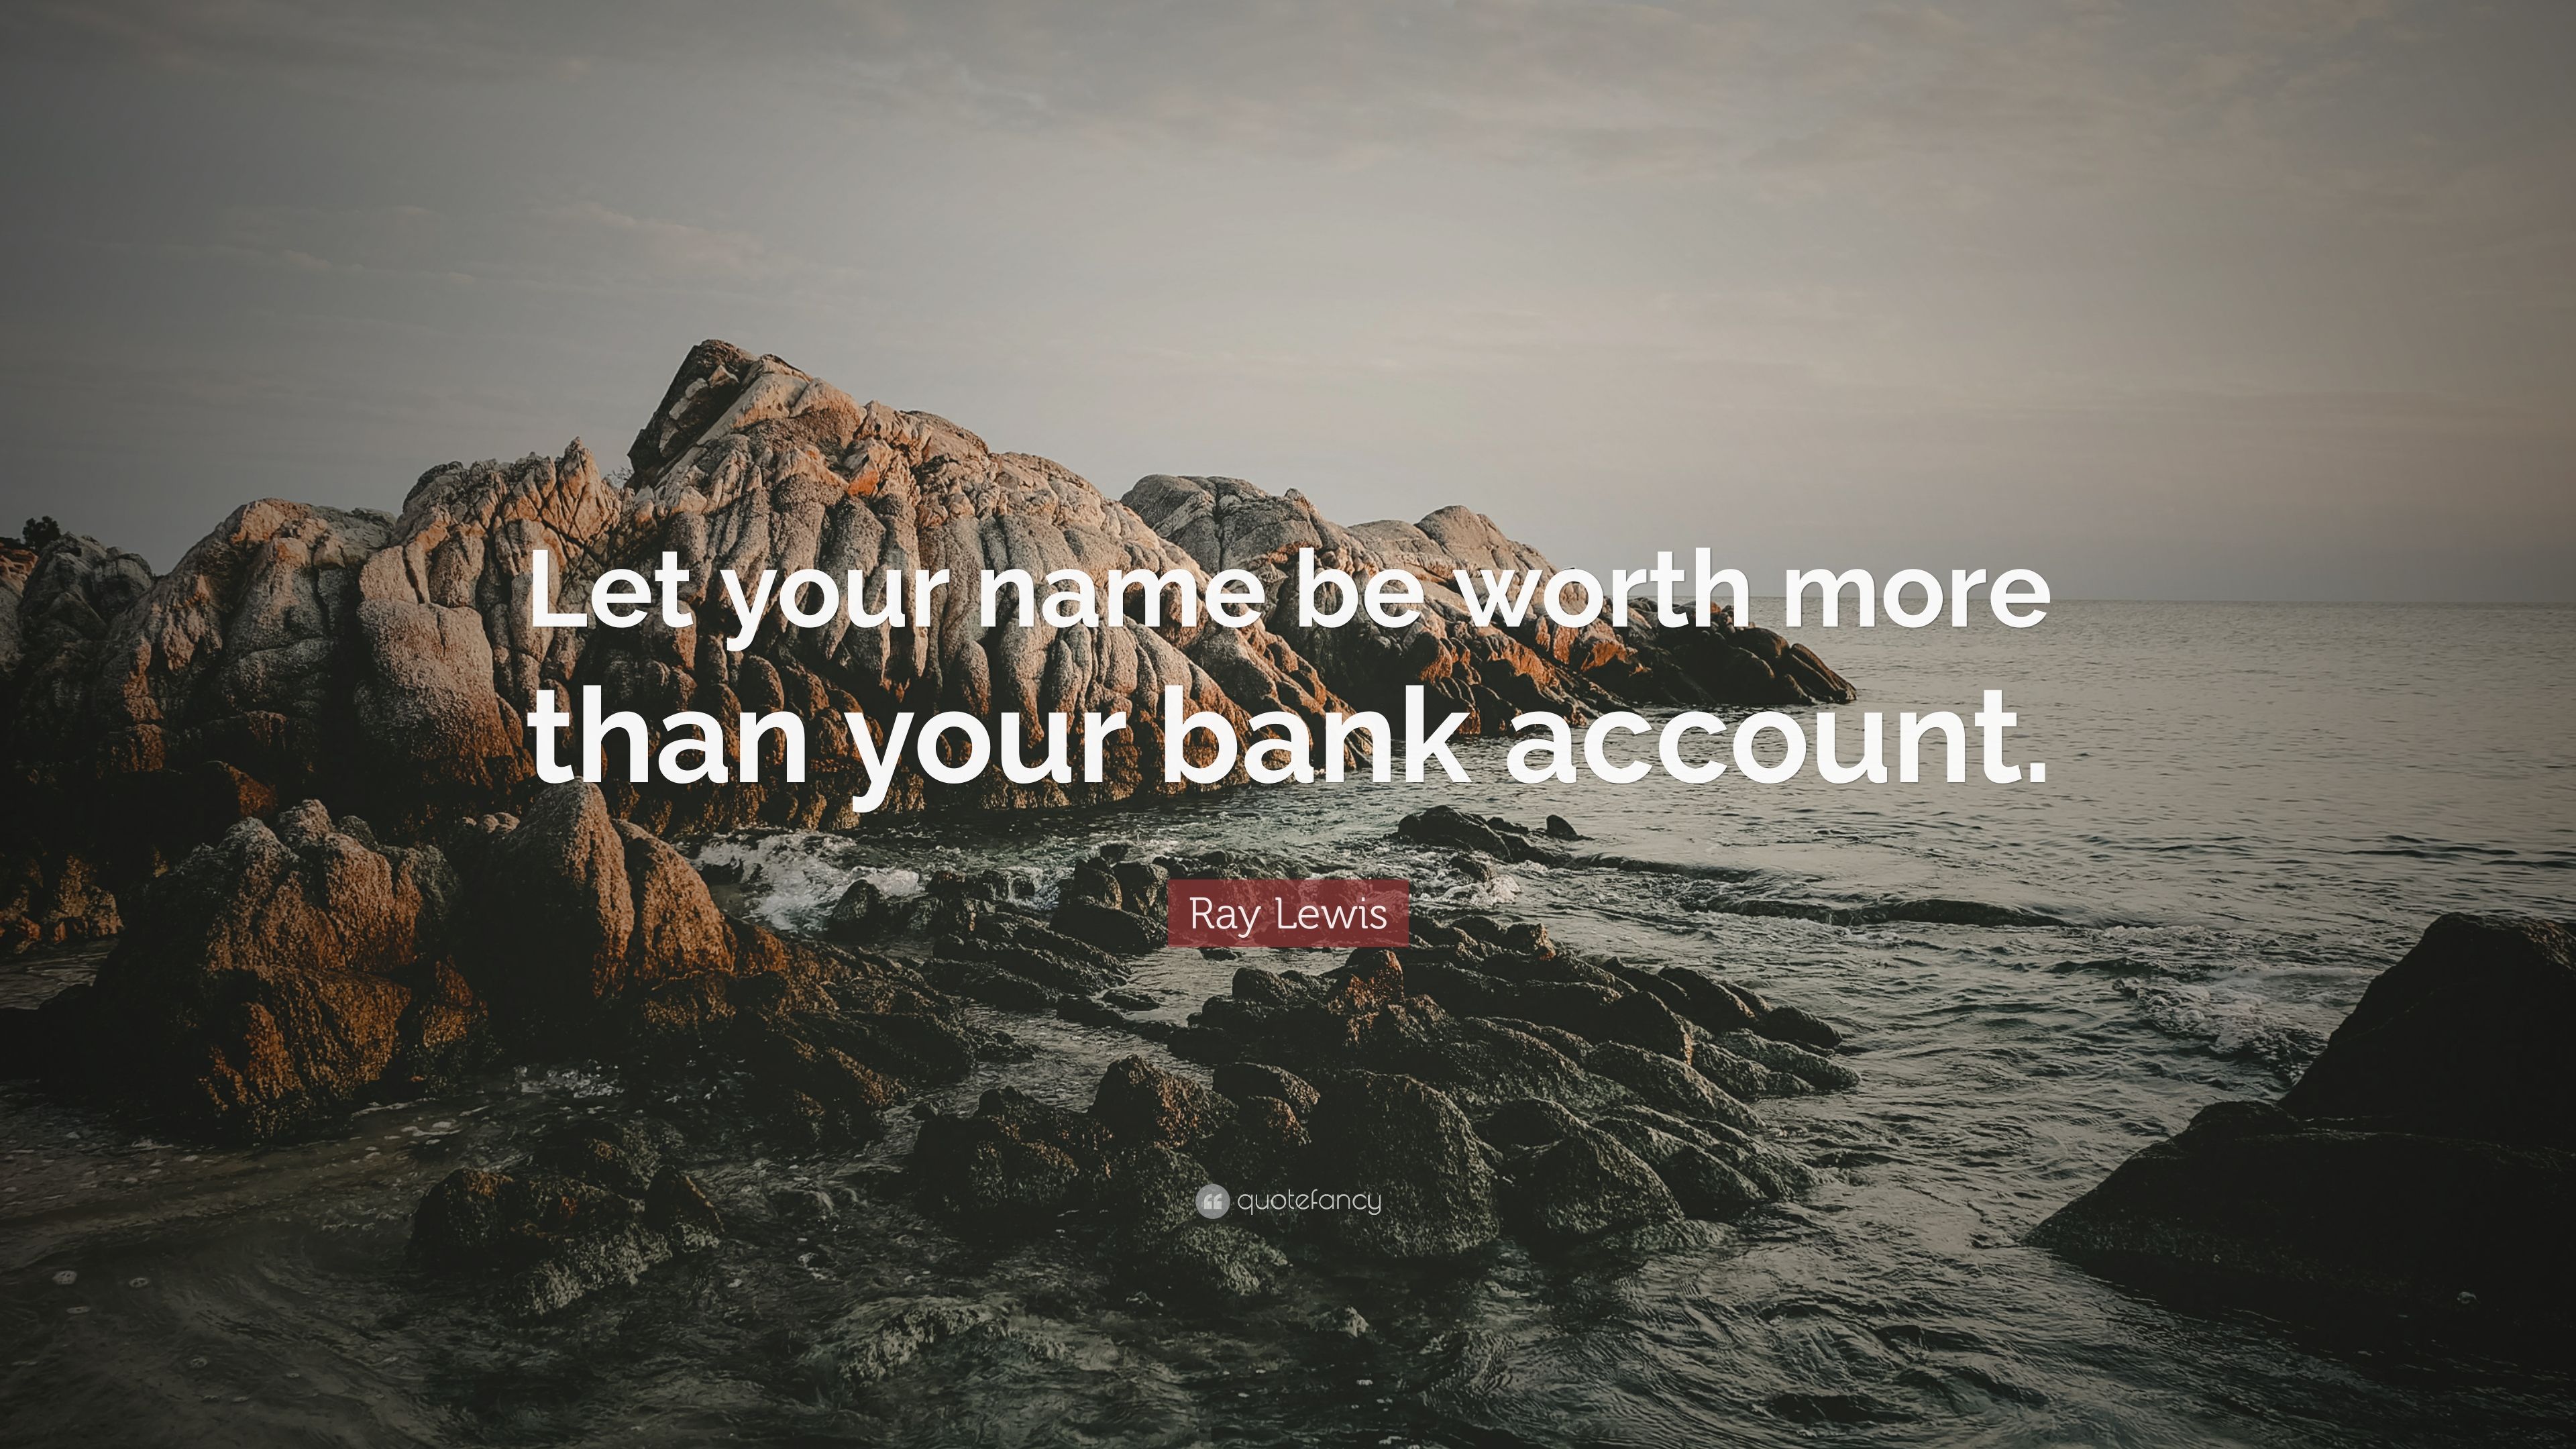 Ray Lewis Quote: “Let your name be .quotefancy.com